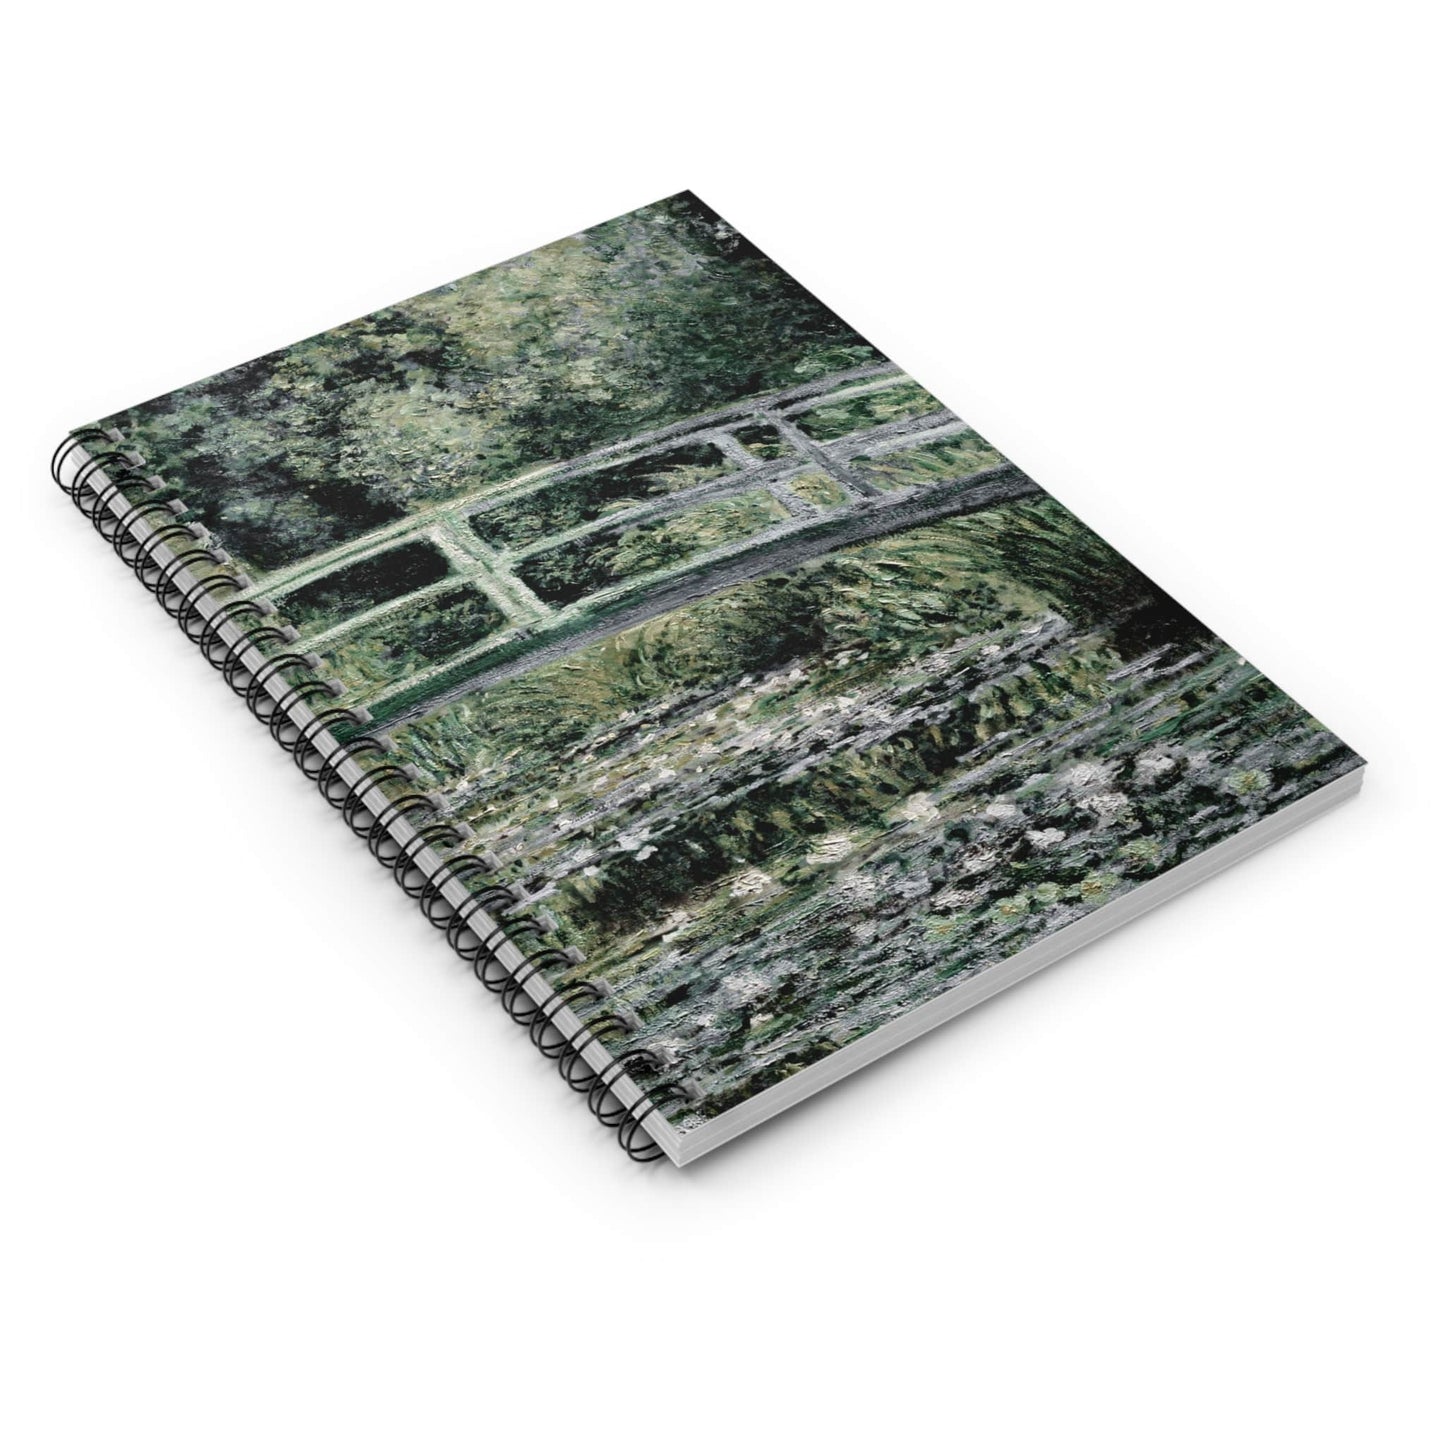 Muted Sage Green Spiral Notebook Laying Flat on White Surface